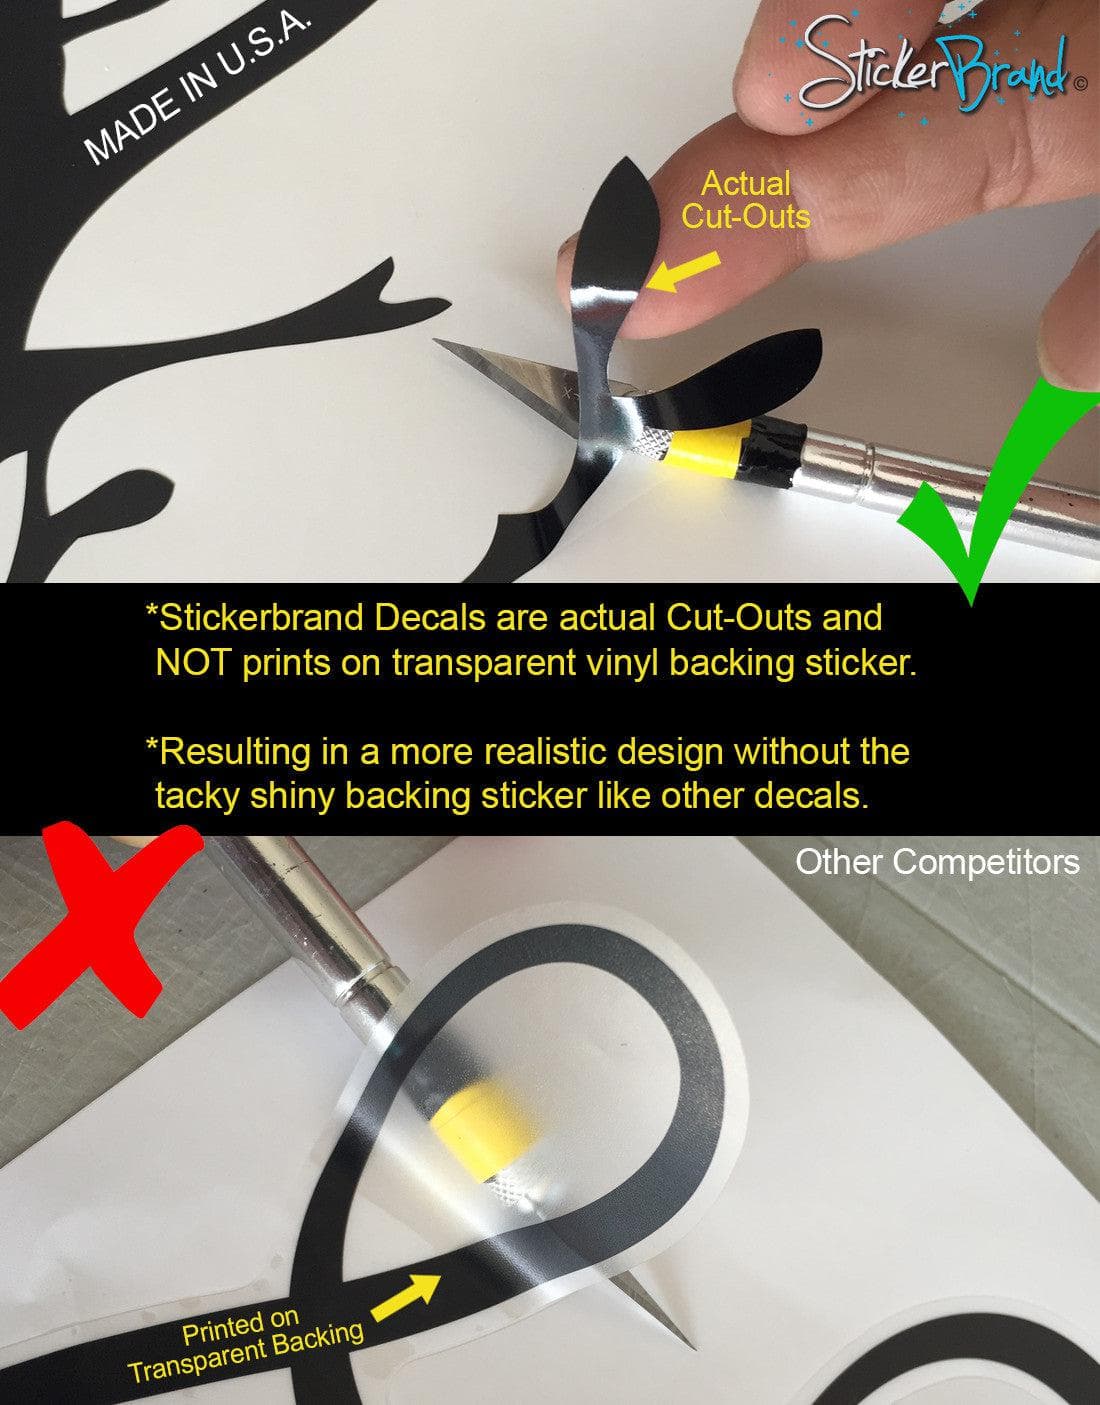 Two images showing a decal being removed from a sticker paper. In the center is a black rectangular box with a yellow text: "StickerBrand Decals are actual Cut-Outs and NOT prints on transparent vinyl backing sticker. Resulting in a more realistic design without the tacky shiny backing sticker like other decals."